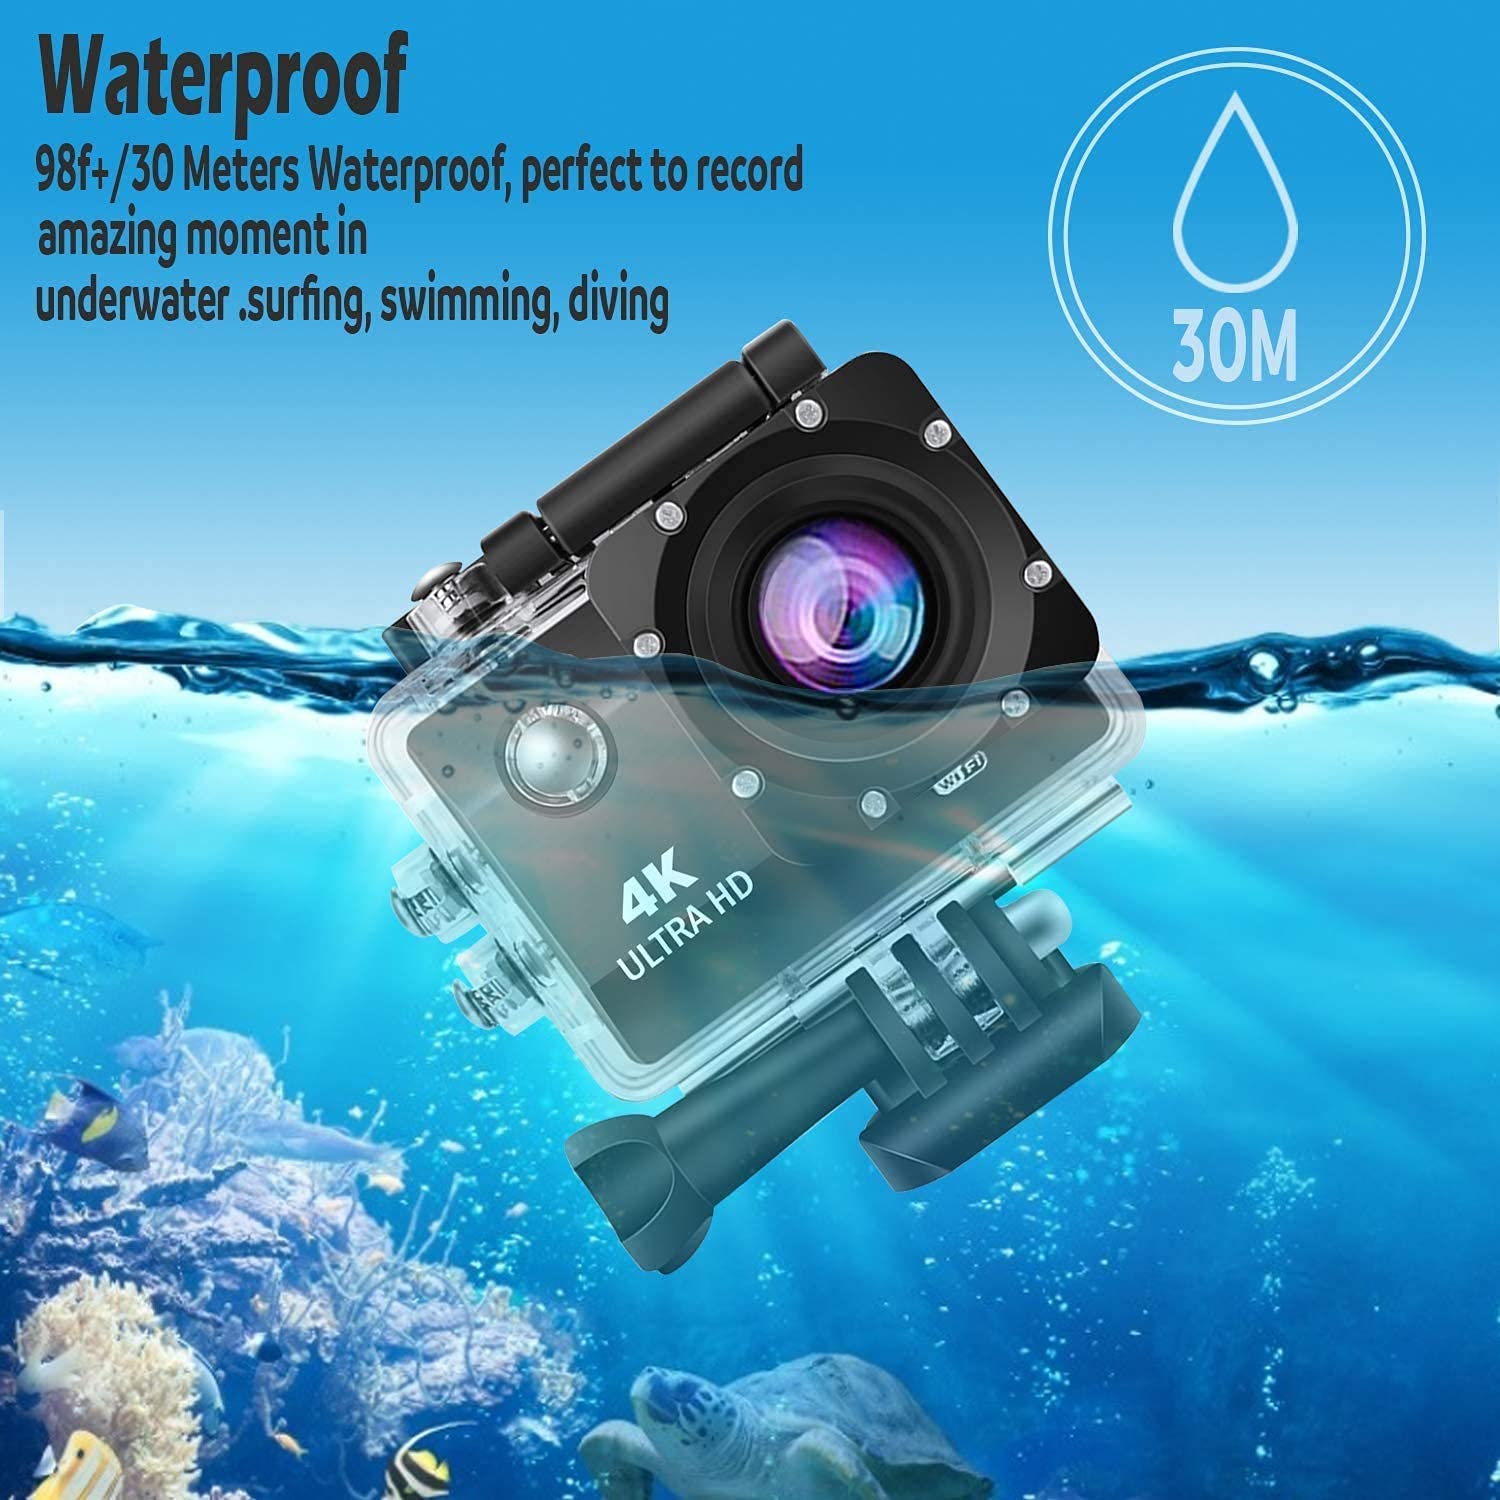 EIS Anti-Shaking 170°Wide Angle WiFi Vlogging Camera with Rechargeable 1050mAh Battery for Biking Tenlso 4K 60FPS Action Cameras Diving 24MP Underwater 98ft Waterproof Camera with Remote Control 